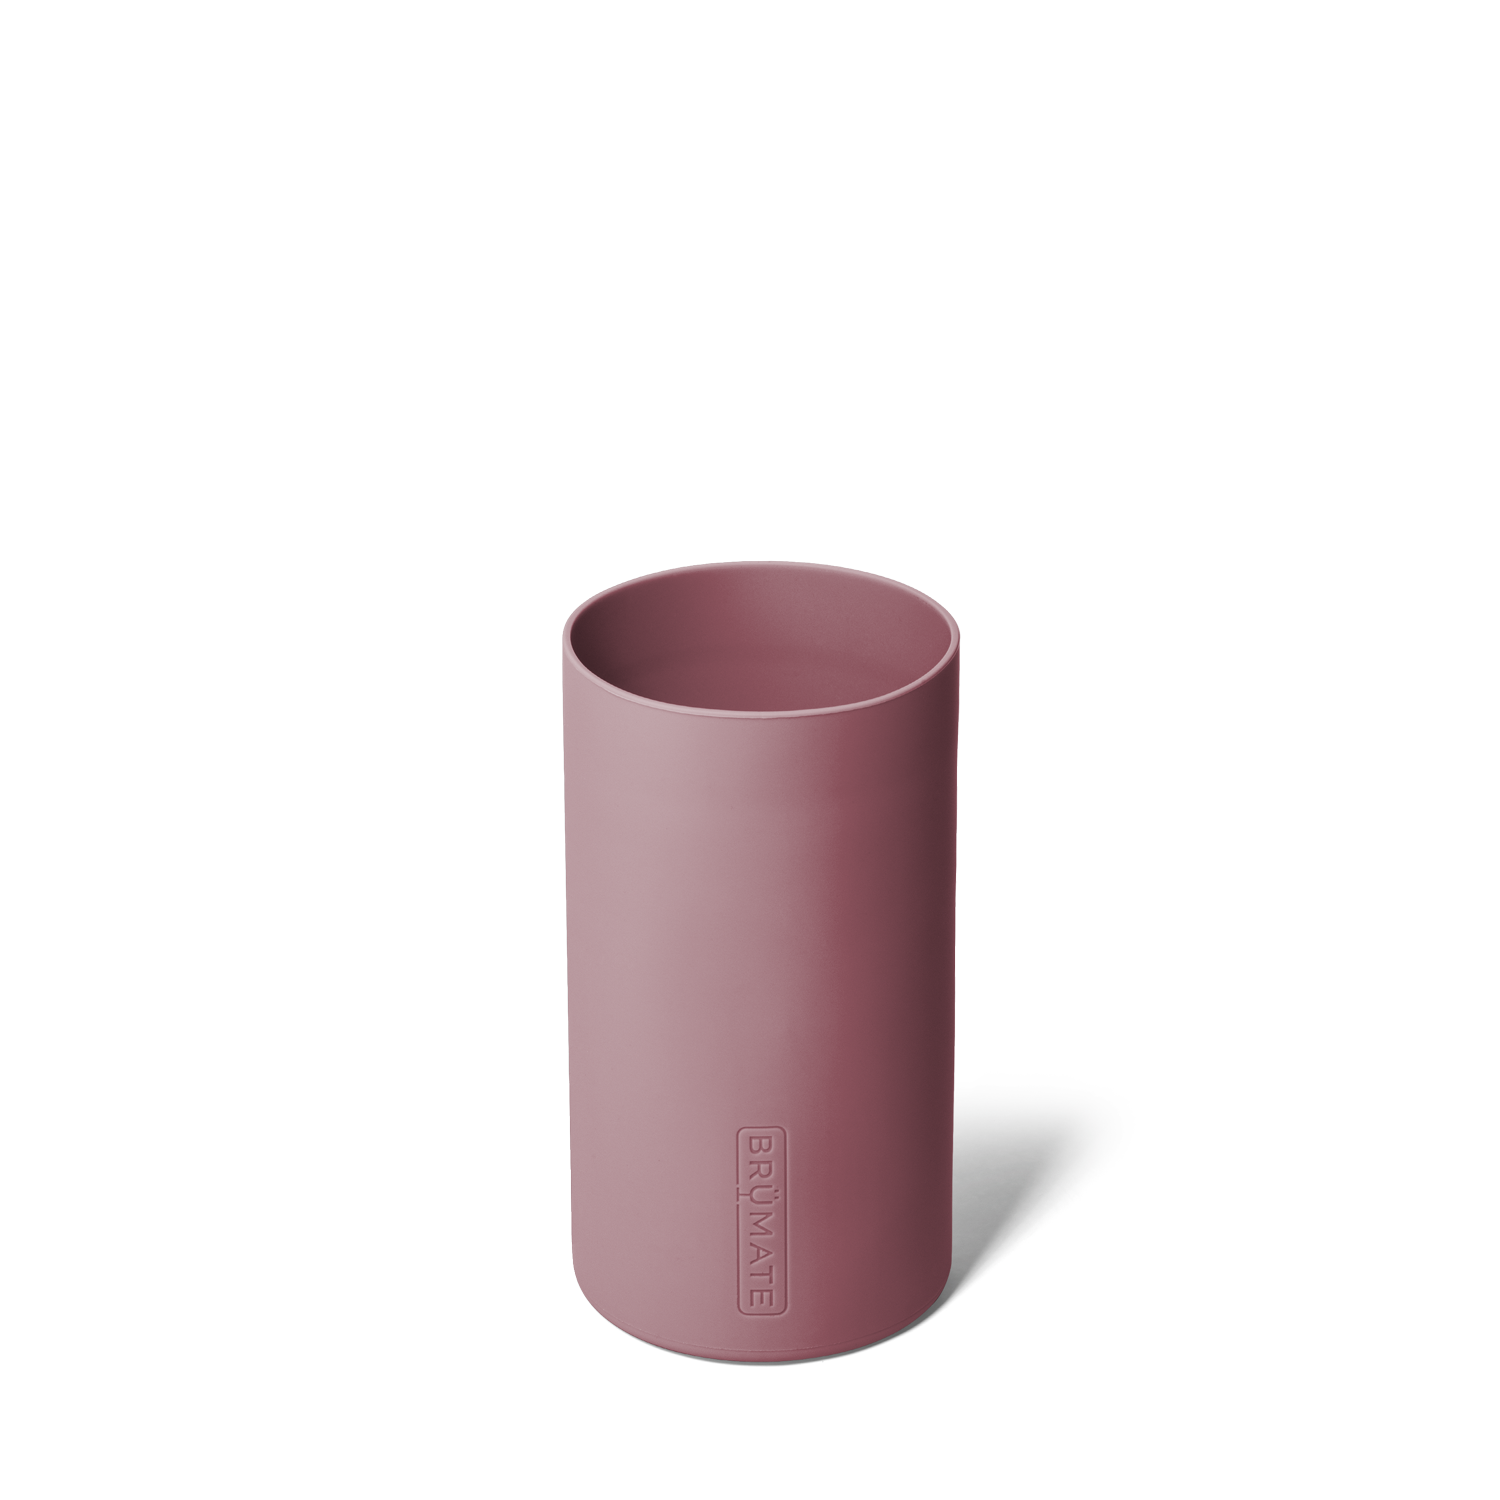 https://cdn.shopify.com/s/files/1/1114/2308/files/rotera-sleeve-35-rose-taupe.png?v=1687267963